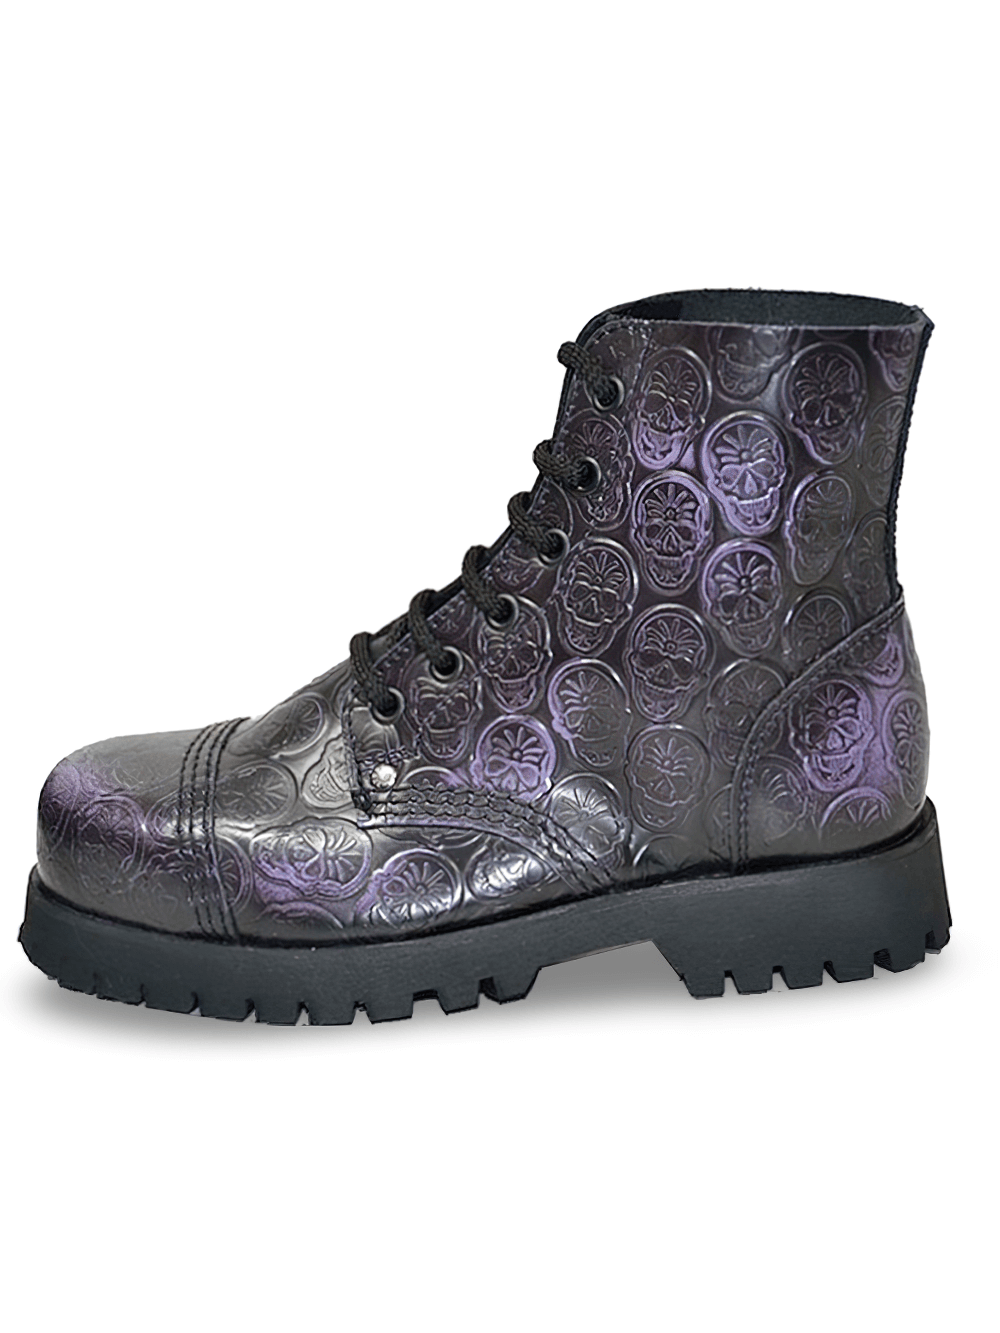 Chic Gothic 6-Eyelet Leather Ranger Boots with Round Toe